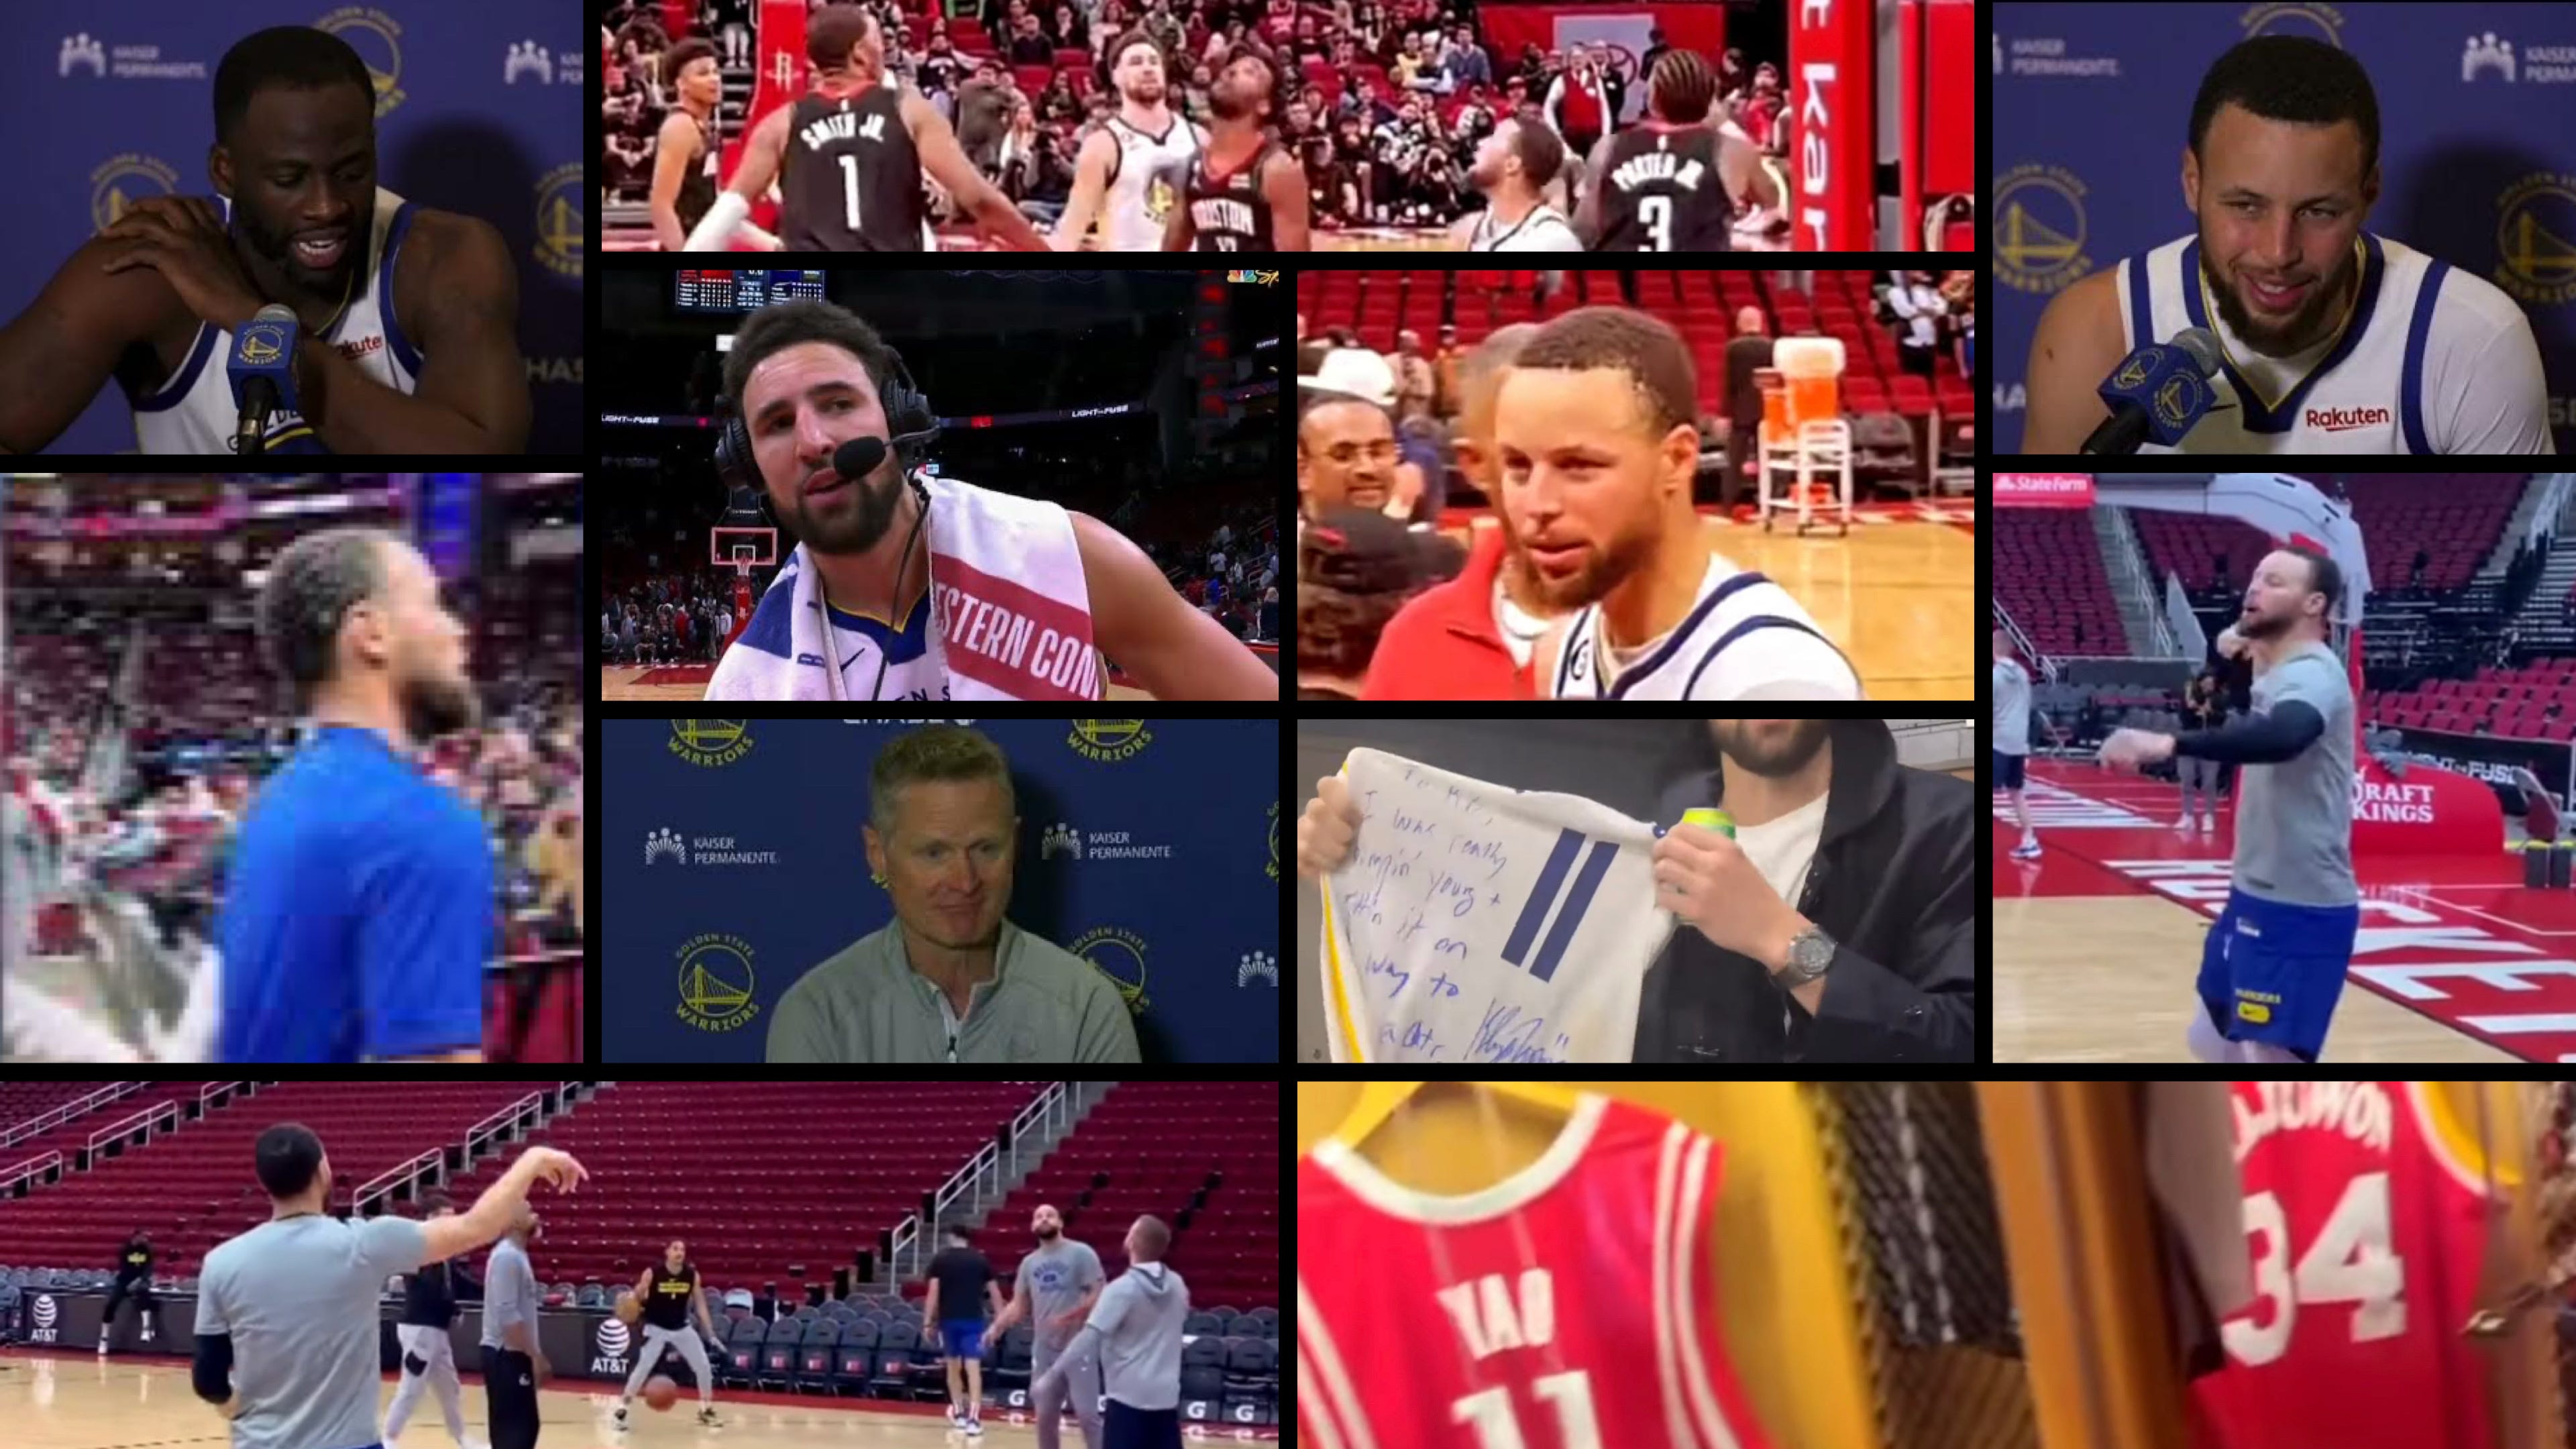 Rockets coach forgets he's in public, celebrates Steph Curry